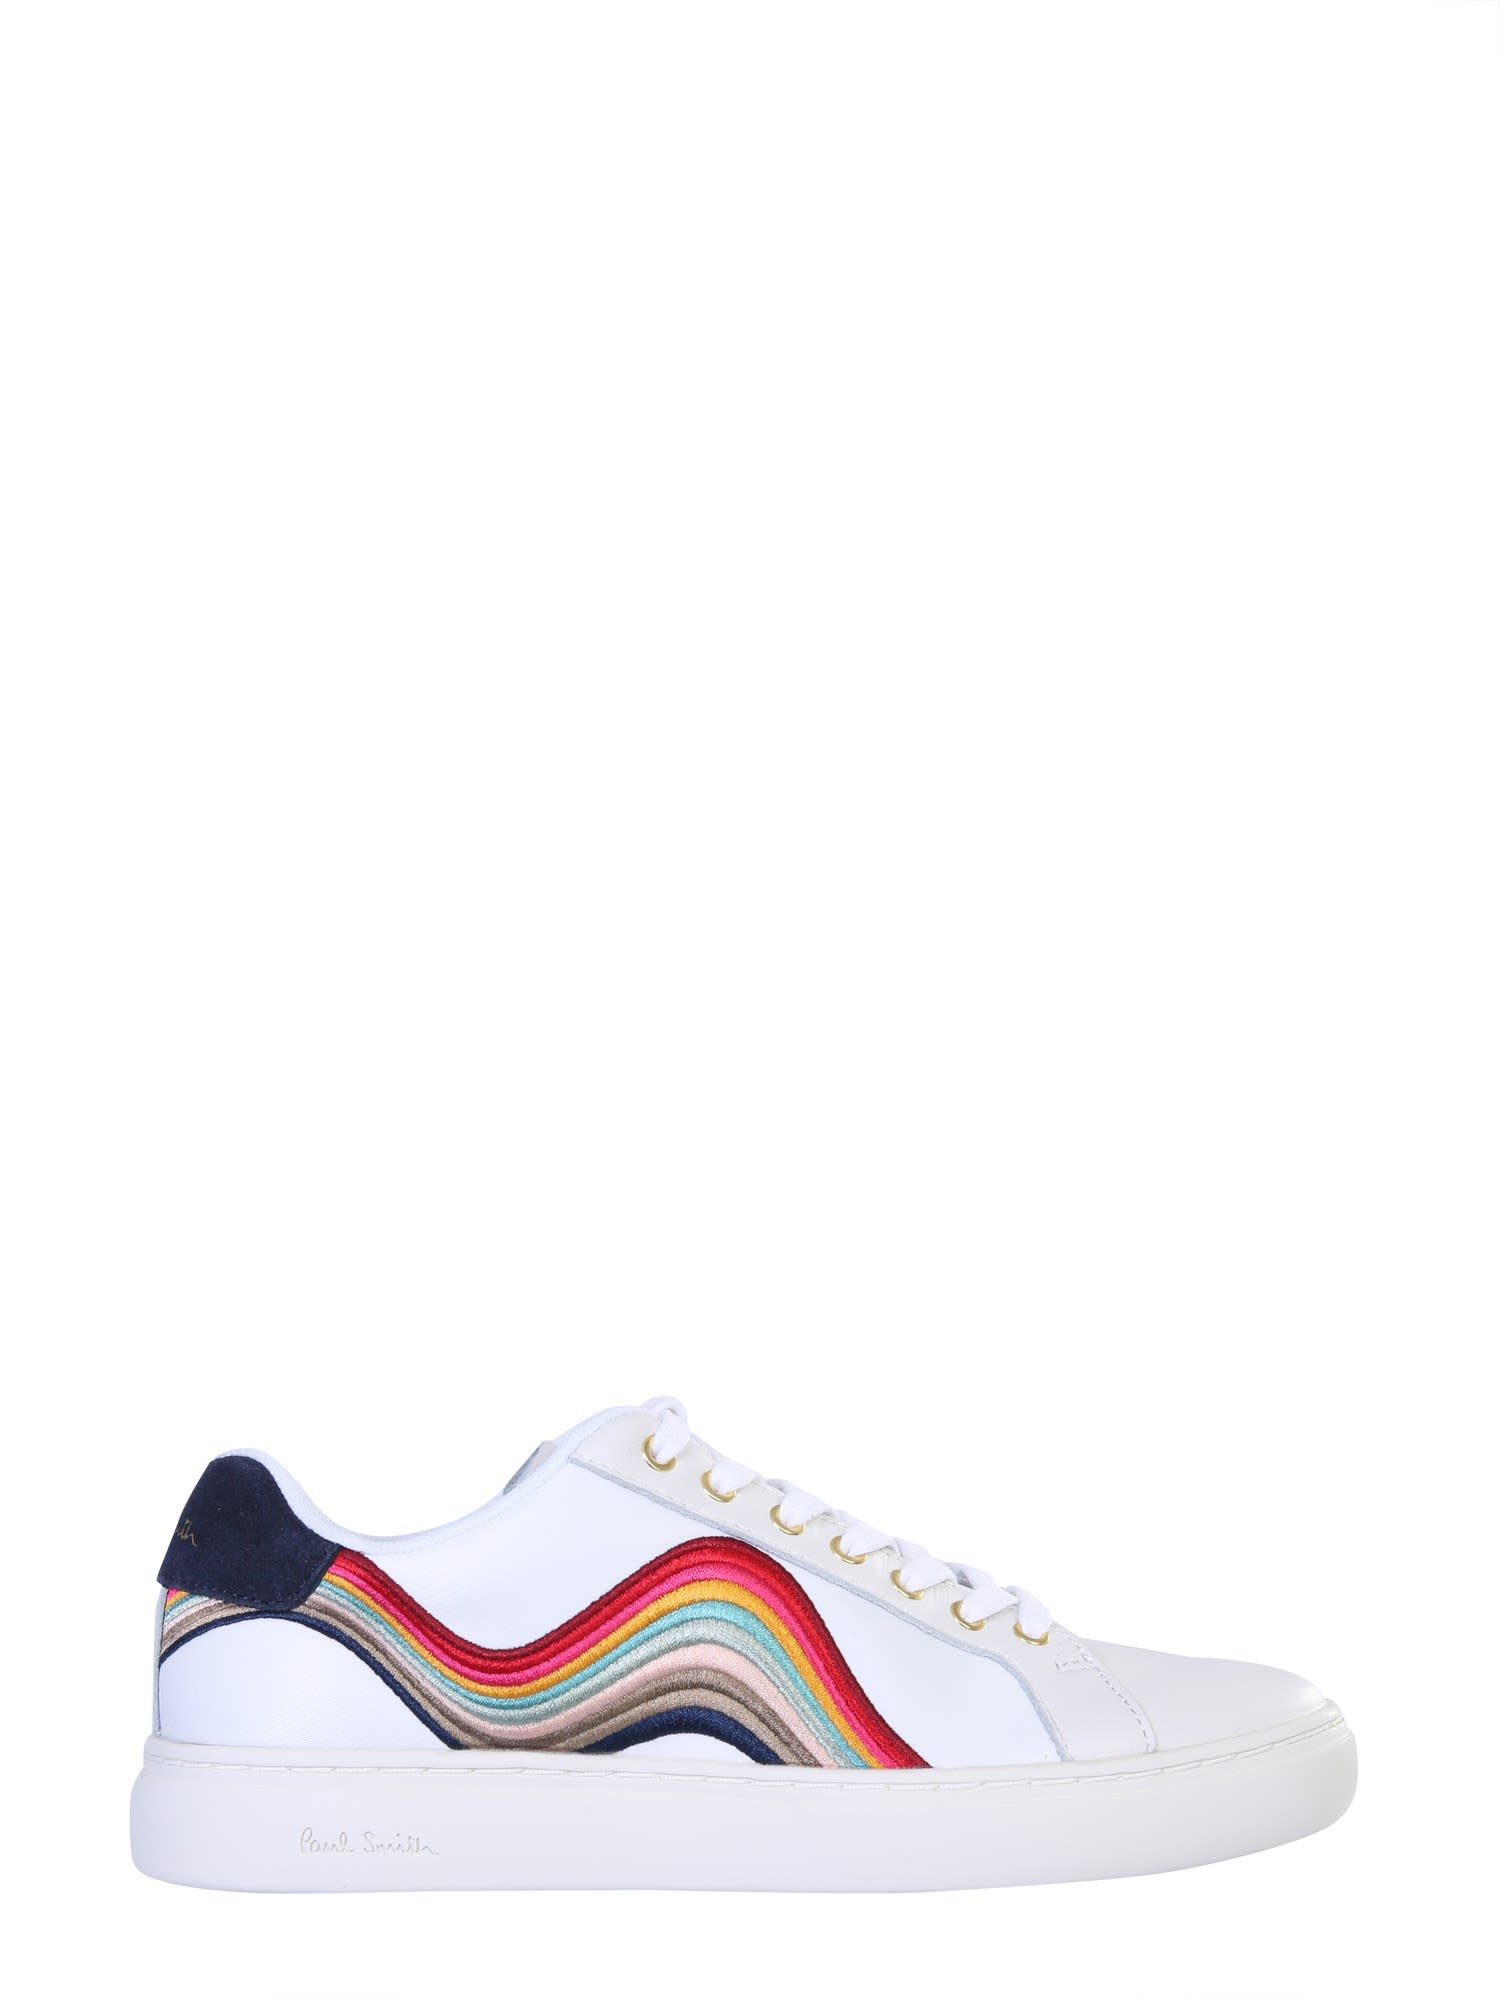 Paleis Nodig uit Hoogte Paul Smith Rainbow-embroidered Trainers In White | ModeSens